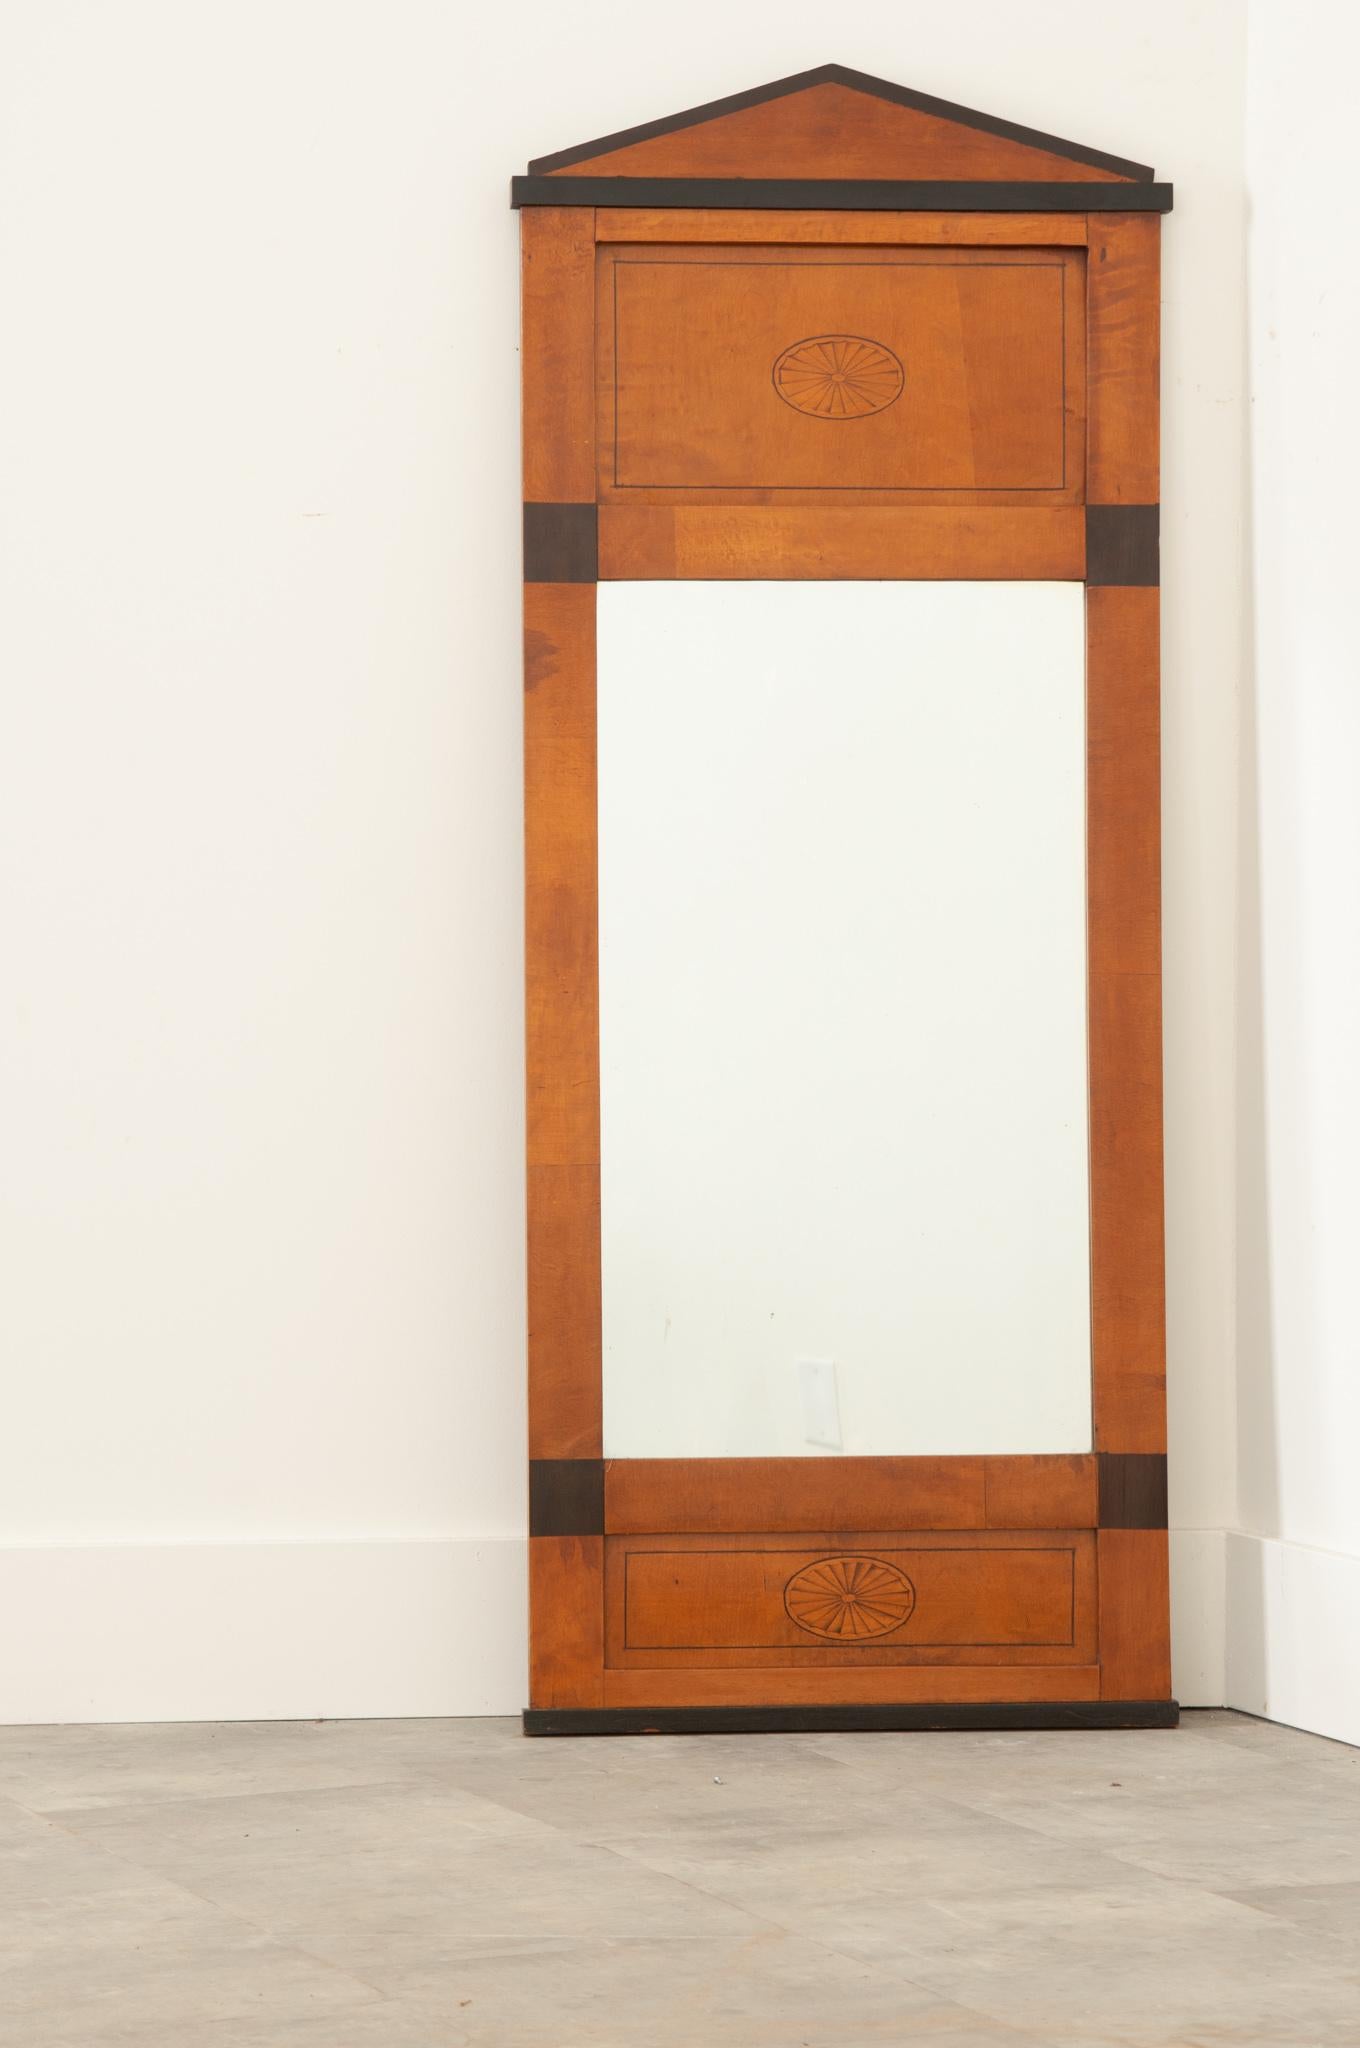 A fantastic tall and narrow satinwood Biedermeier style trumeau from 19th century Netherlands. The smart mirror has a clean, linear design with ebonized accents that contrast the satinwood frame marvelously. Two oval inlaid fan motifs embellish the